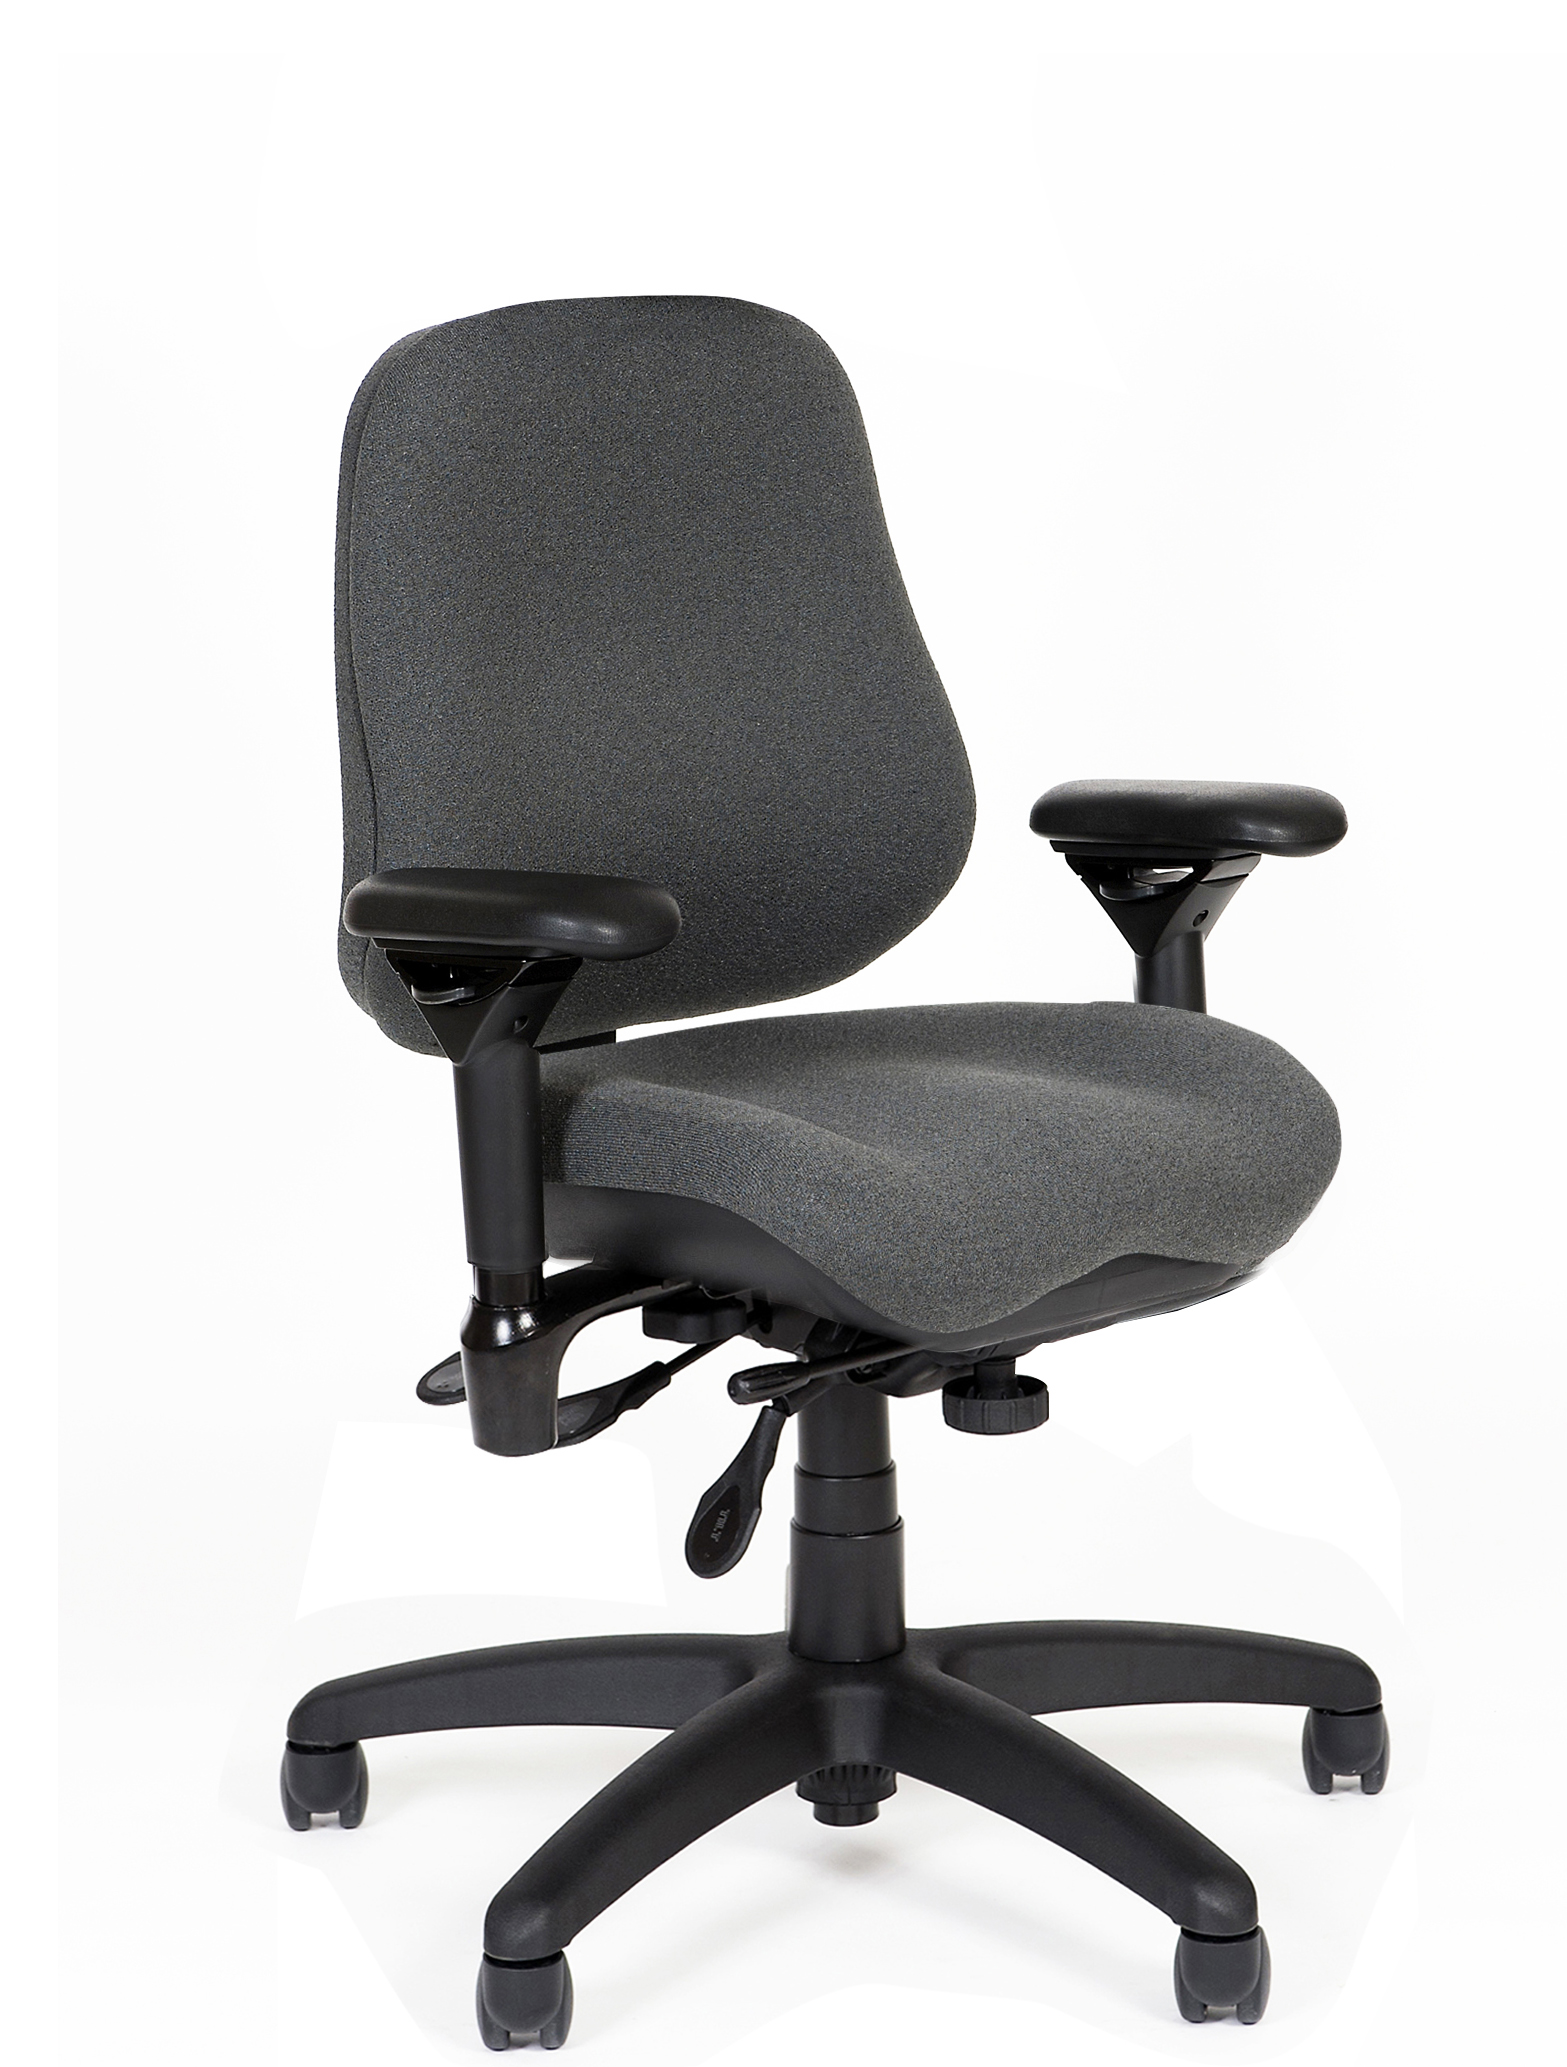 J2407 Mid Back Task Chair Gray Fabric Black Base Right Angle